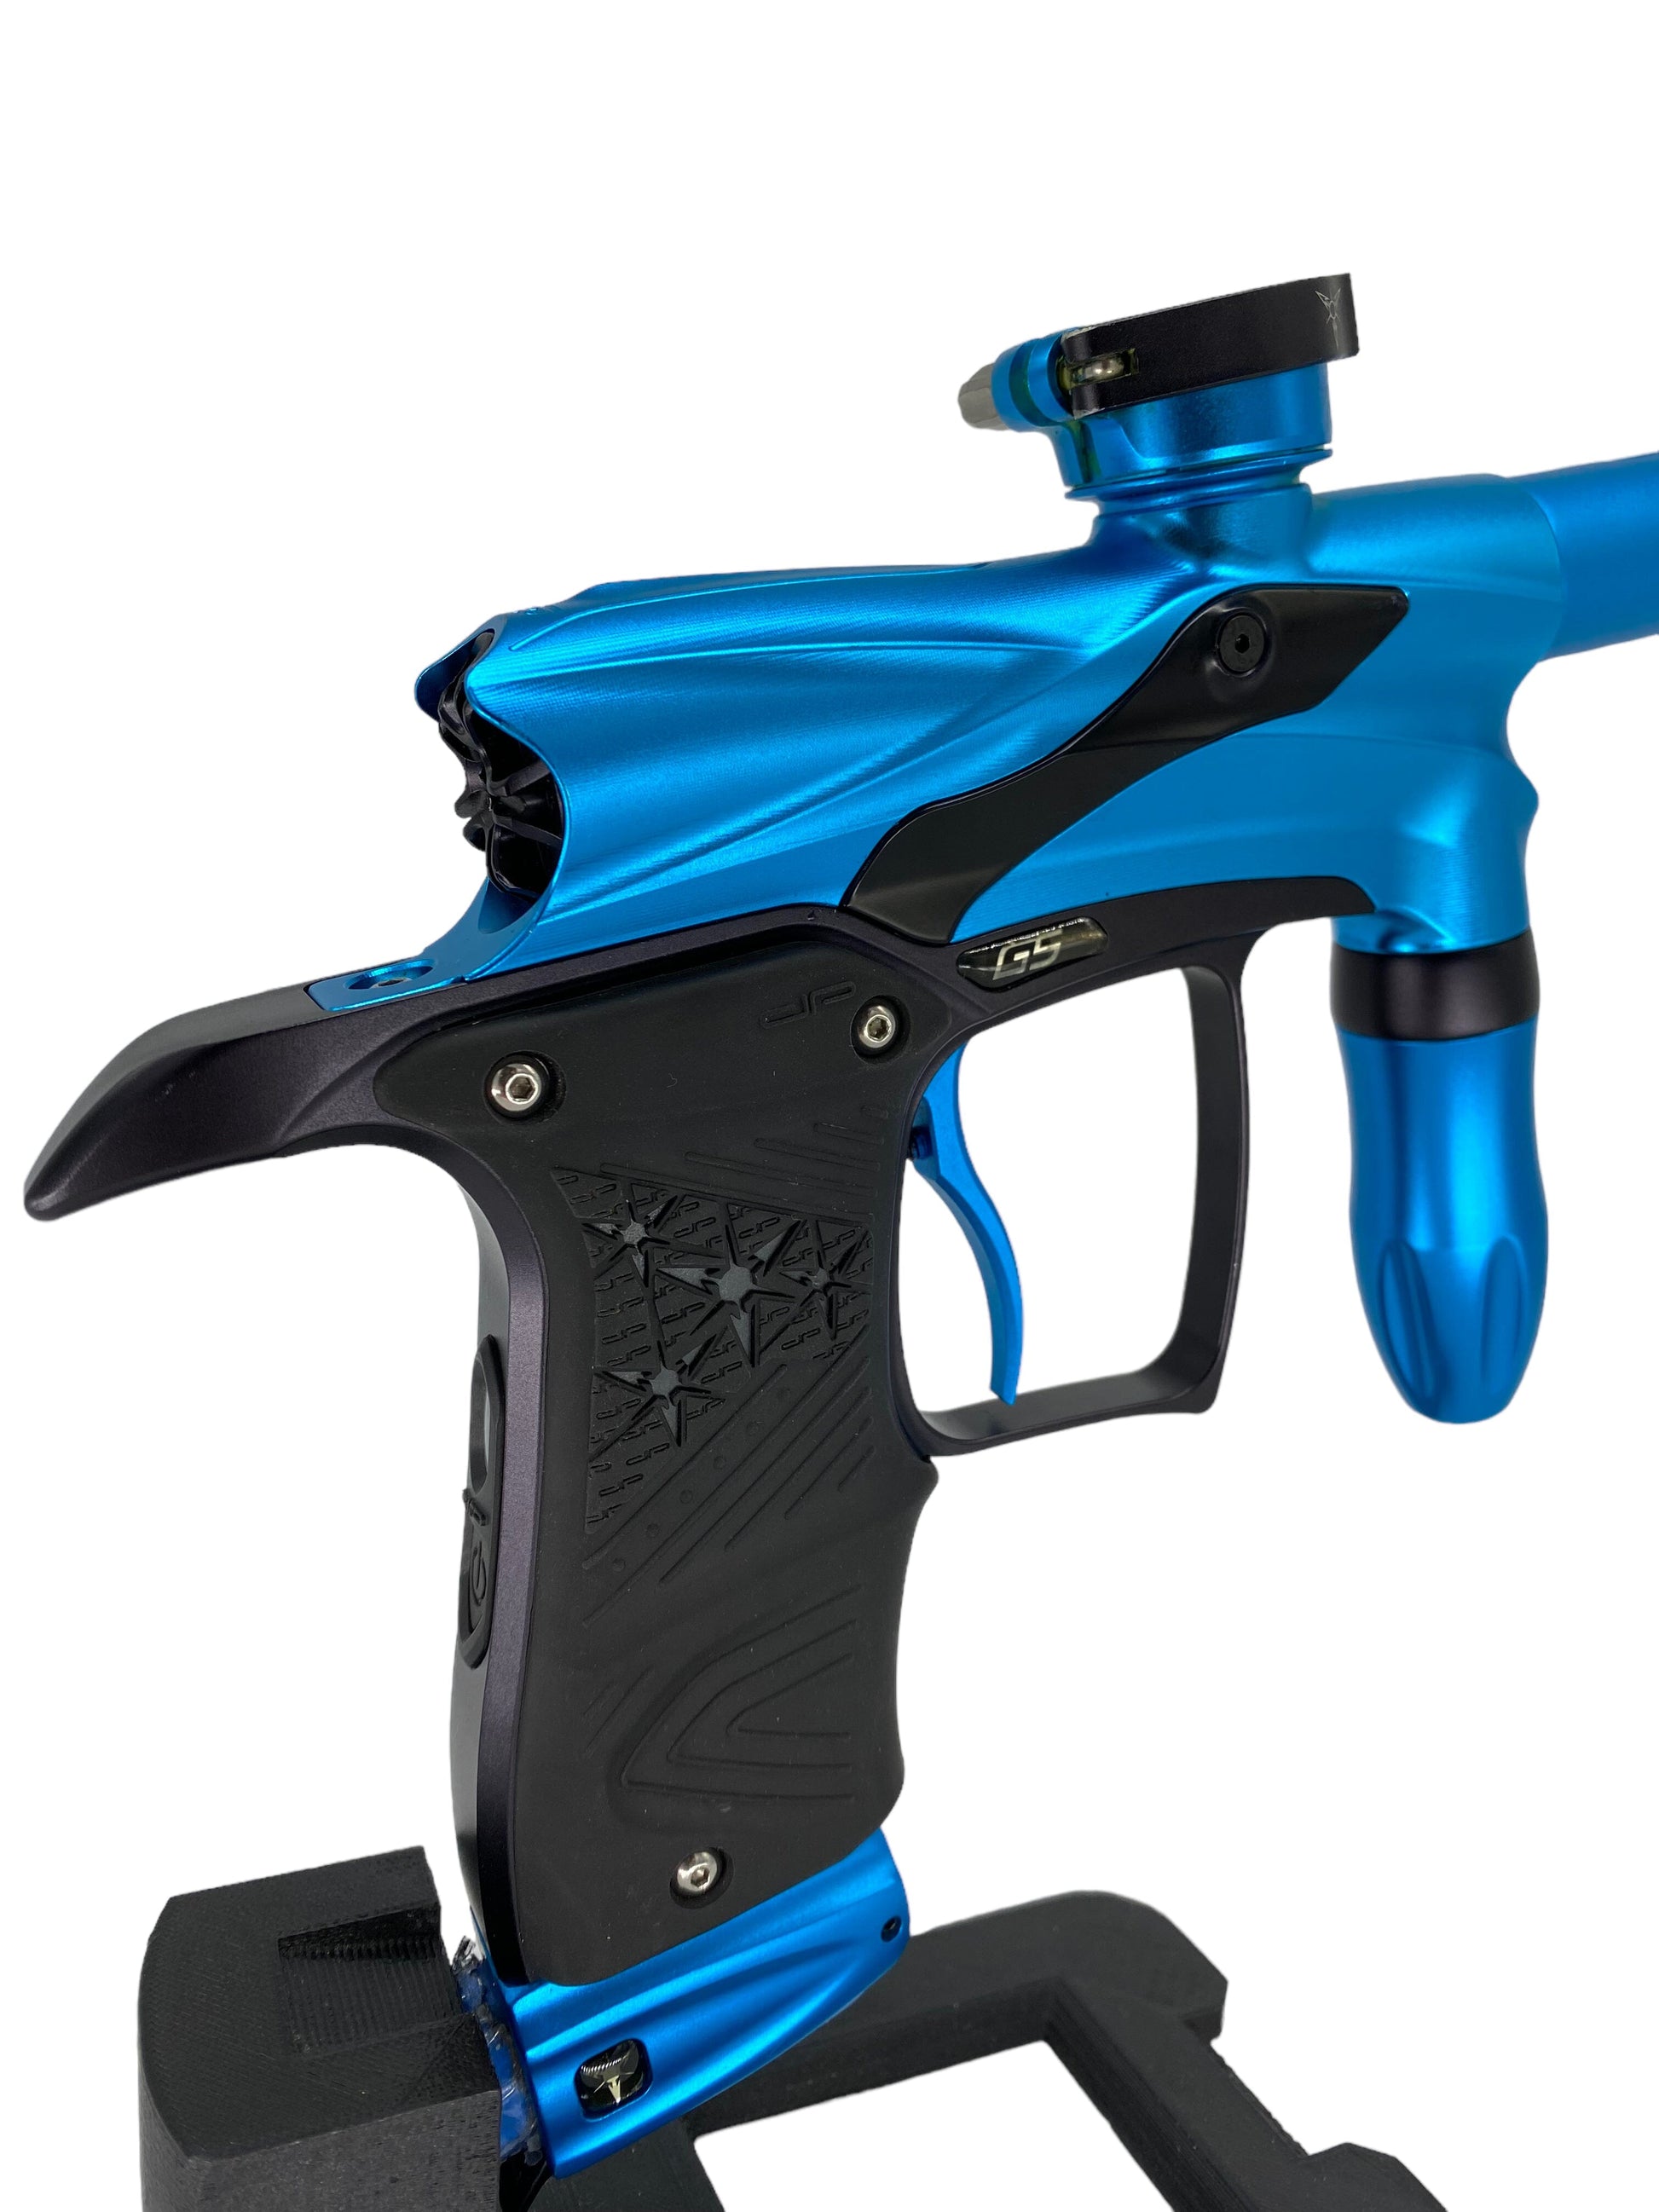 Used Dangerous Power G5 Paintball Gun from CPXBrosPaintball Buy/Sell/Trade Paintball Markers, Paintball Hoppers, Paintball Masks, and Hormesis Headbands